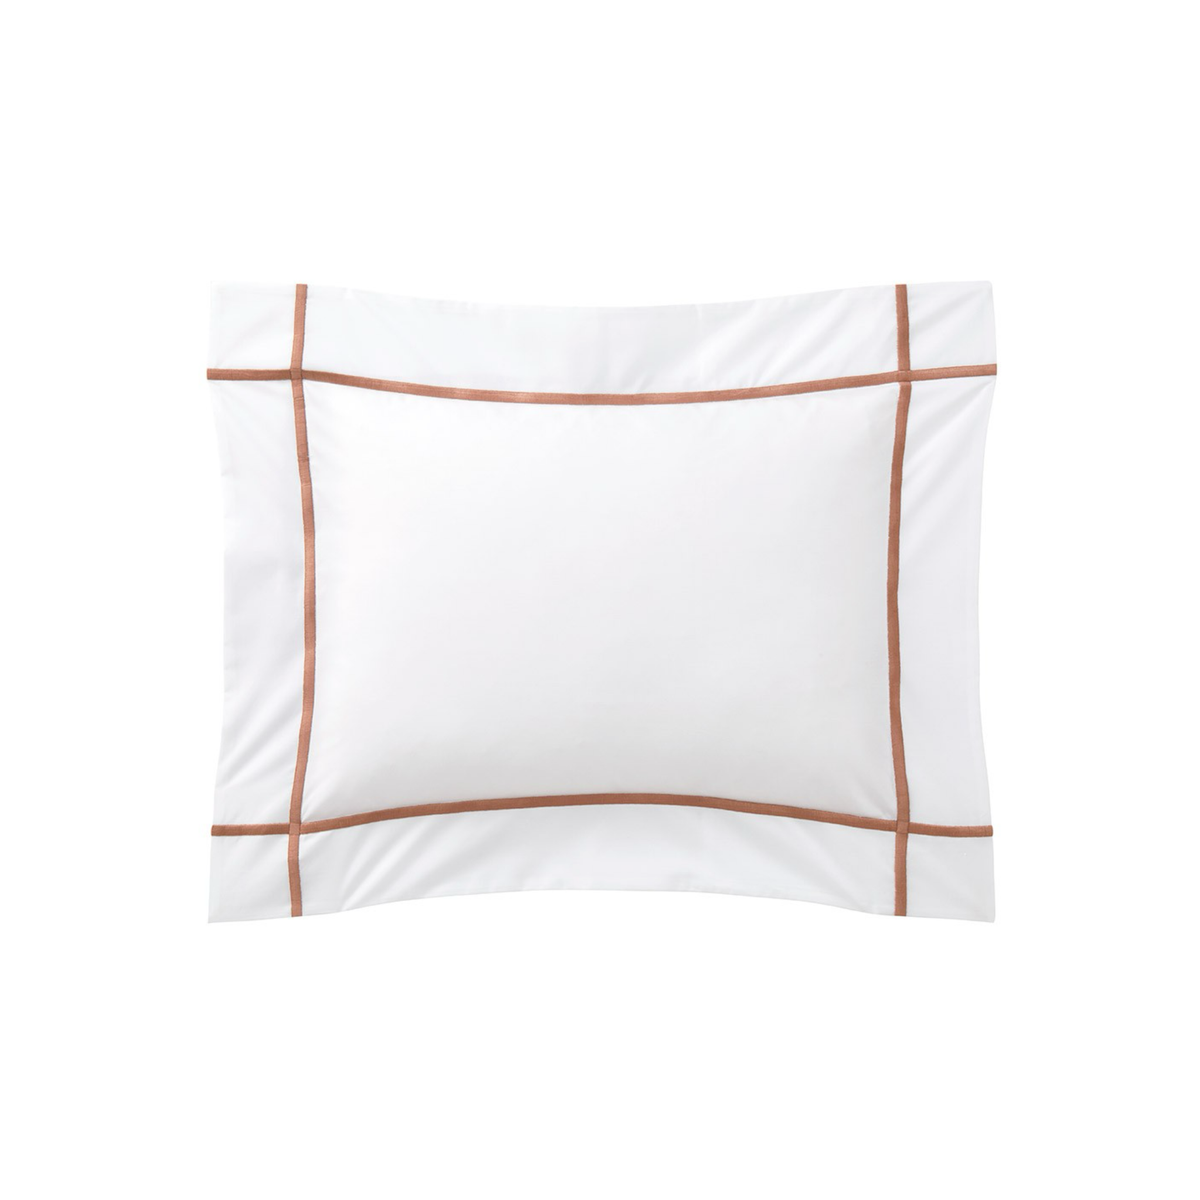 Boudoir Sham of Yves Delorme Athena Bedding in Sienna Color